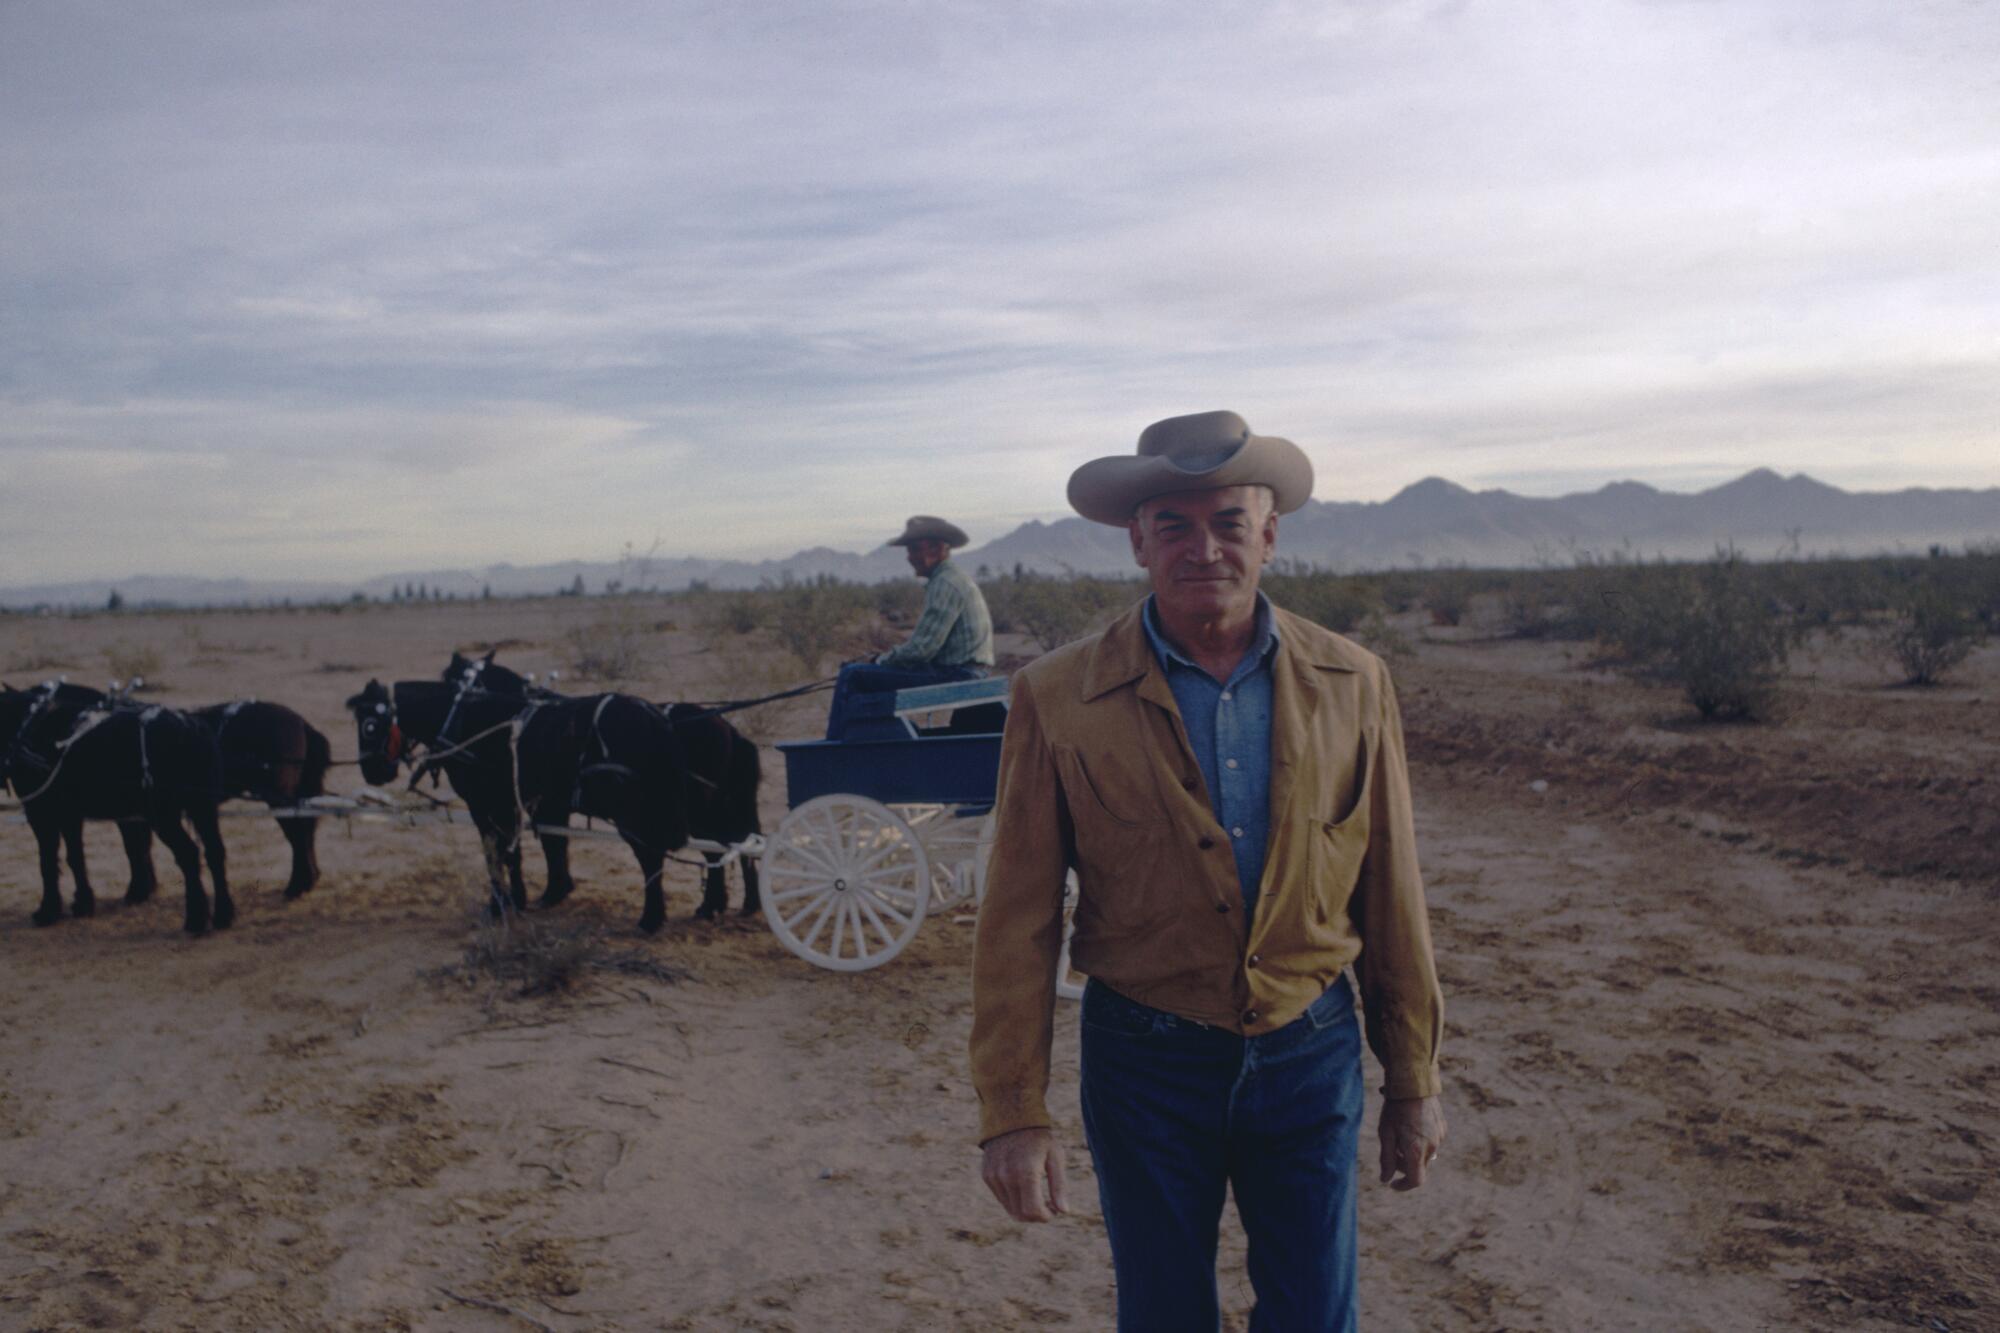 A middle-aged white man wearing a cowboy hat in front of a horse-drawn wagon